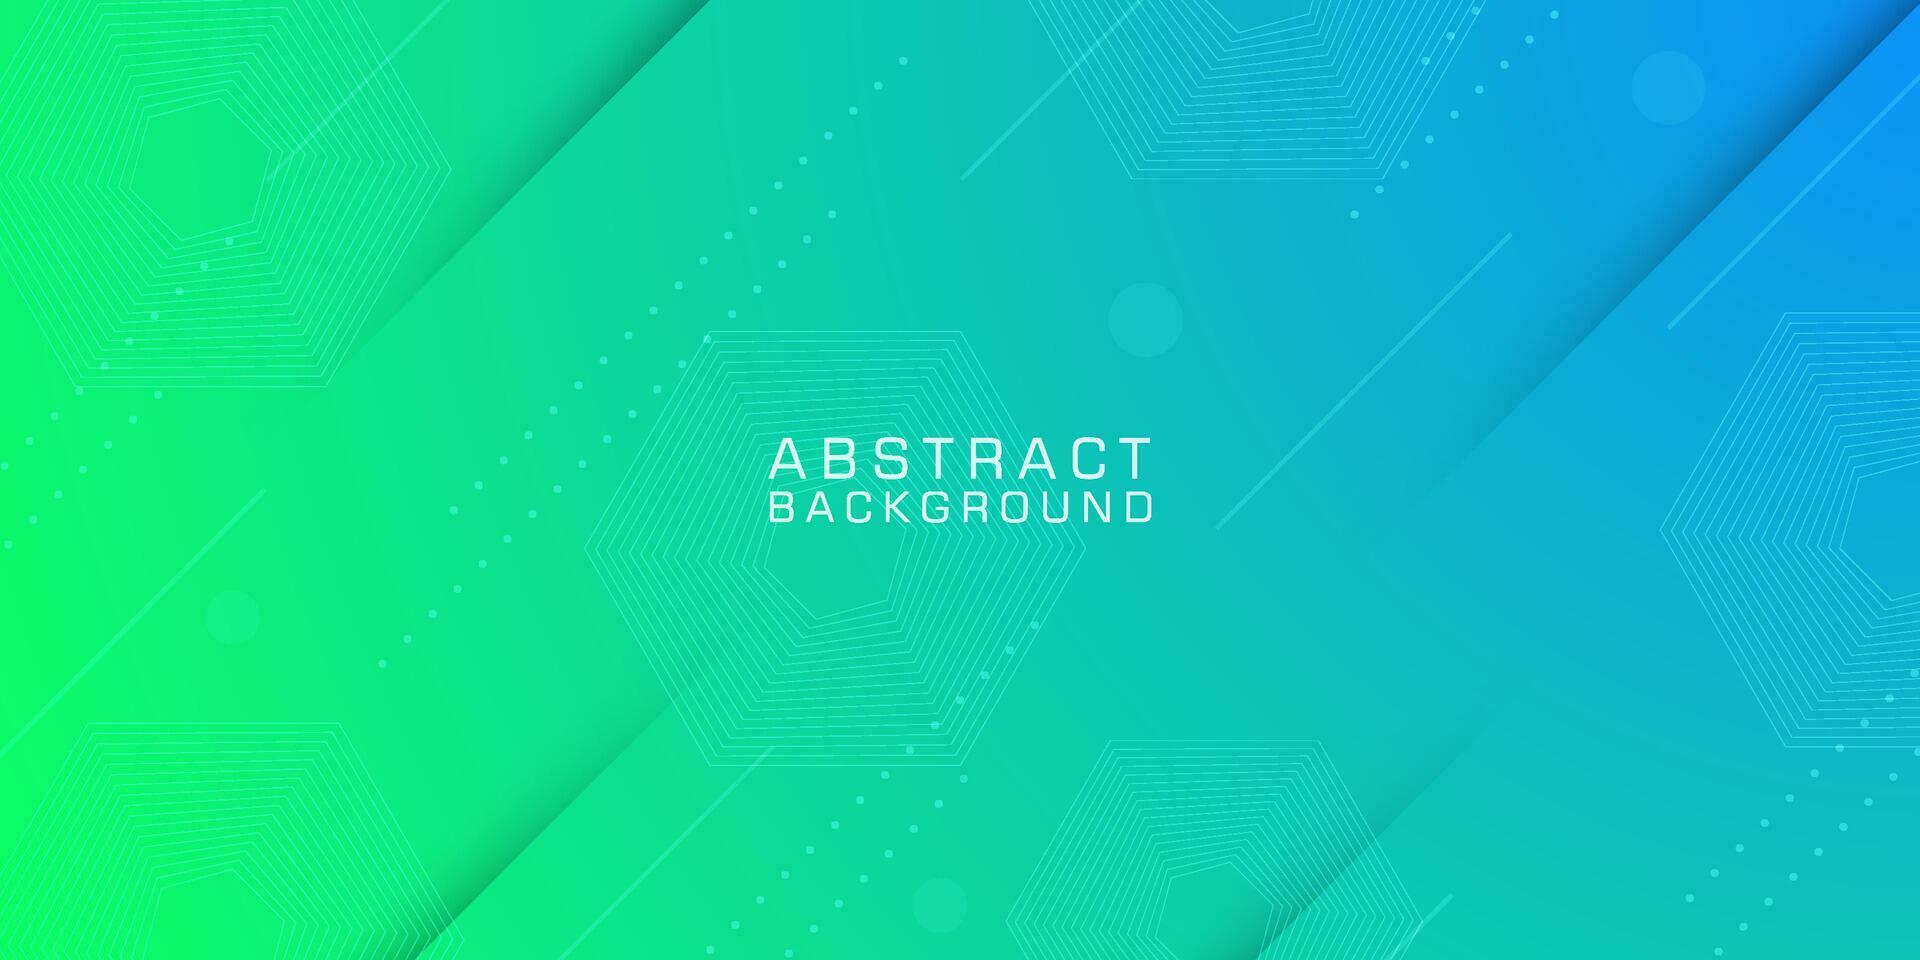 Minimal abstract bright blue and green gradient illustration background with simple geometric pattern. Modern and cool design. Eps10 vector